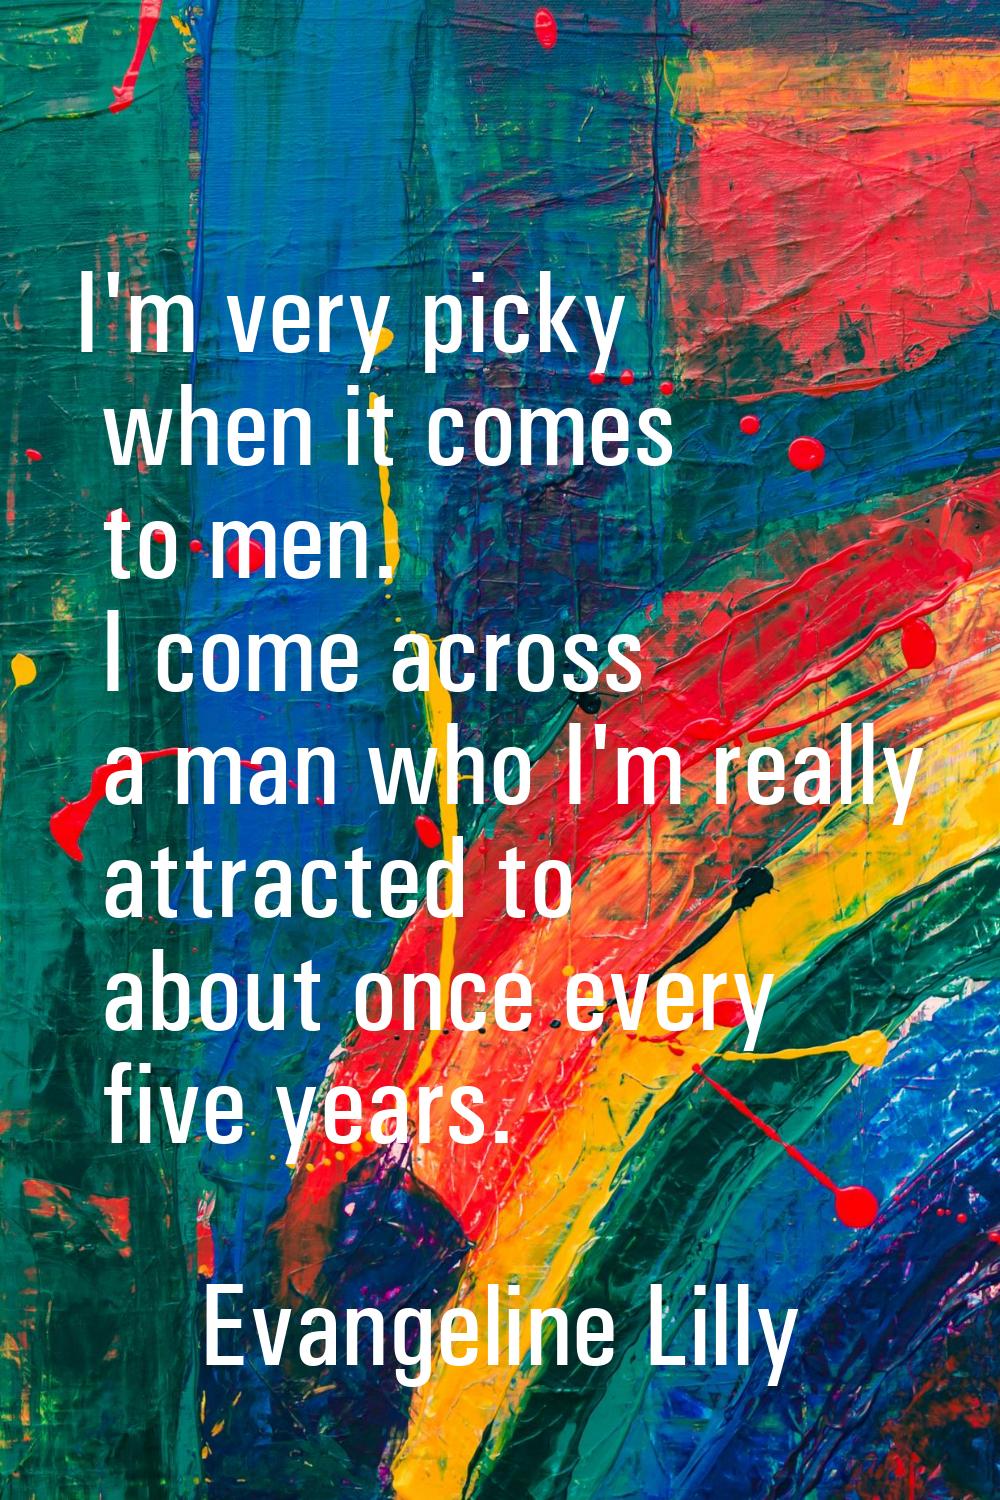 I'm very picky when it comes to men. I come across a man who I'm really attracted to about once eve